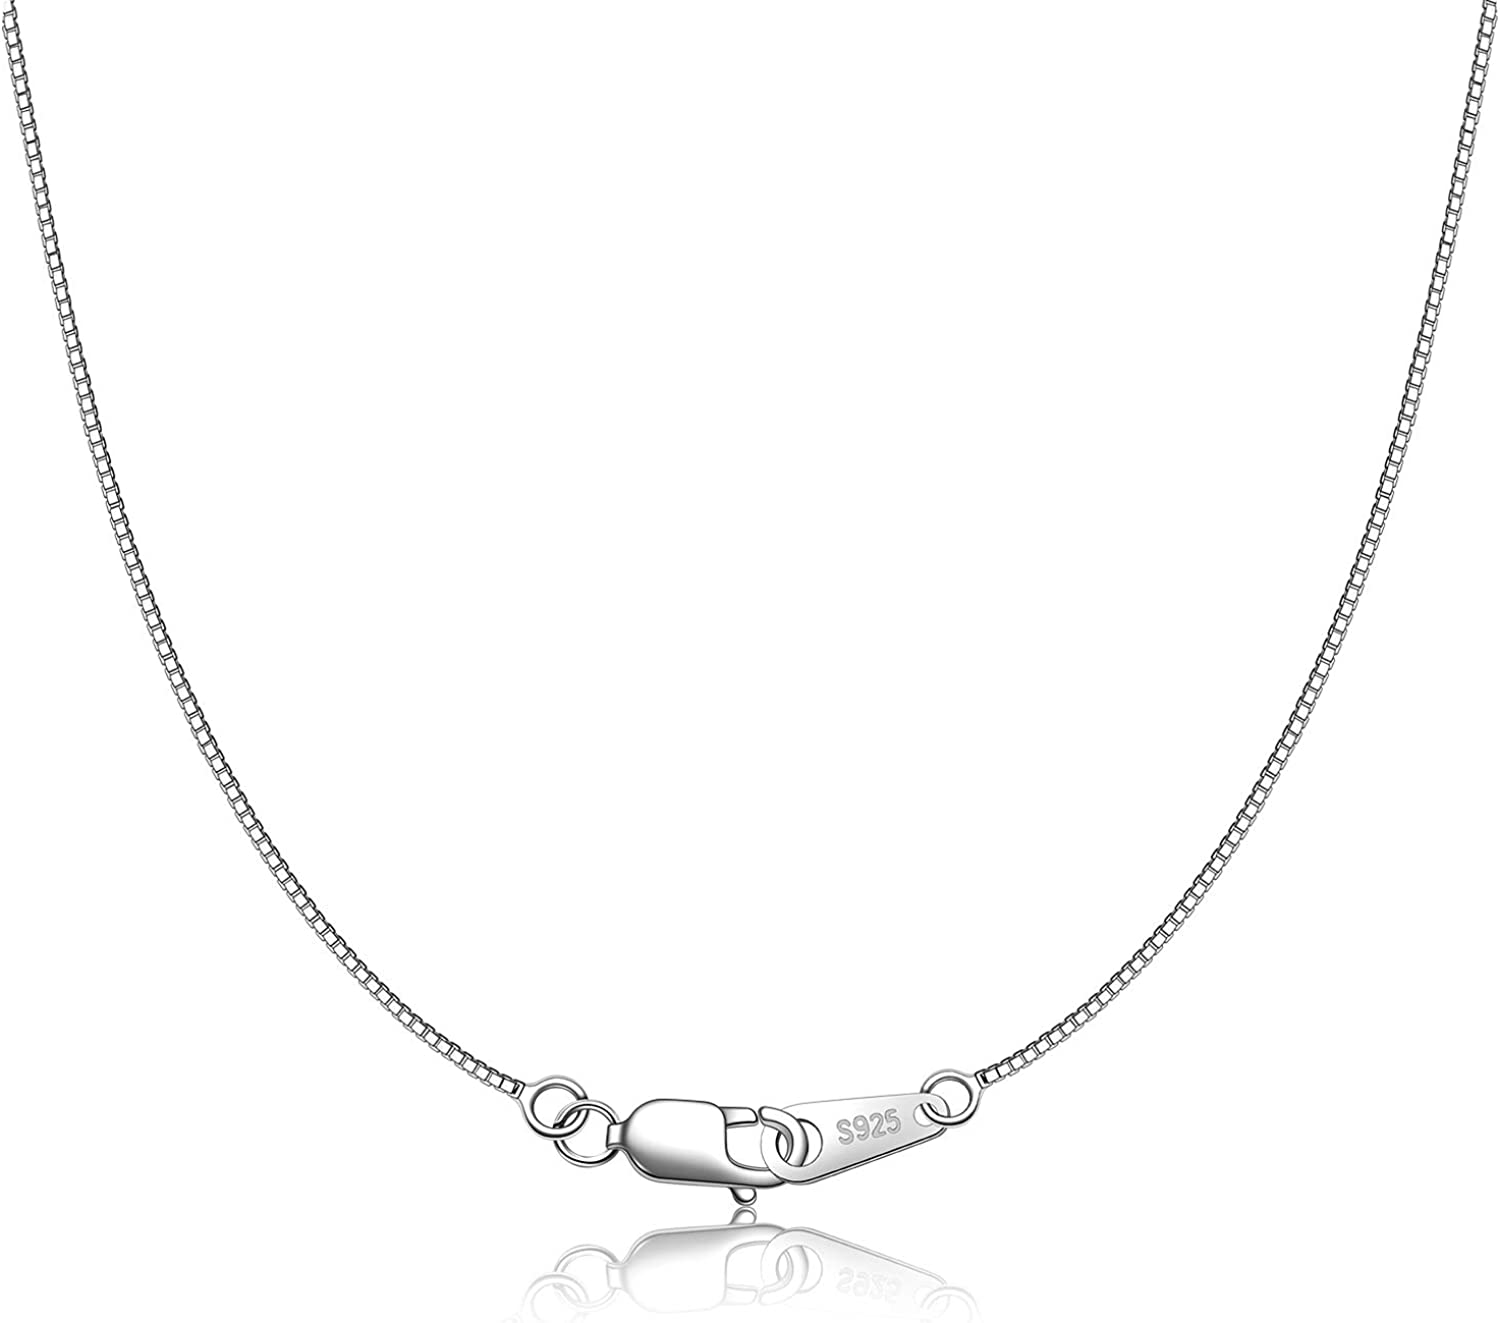 CIELTEAR 925 Sterling Silver Chain Necklace for Women 0.8mm Box Chain, Italian Necklace Chain, Super Strong & Thin & Long16/18/20/22/24 Inches